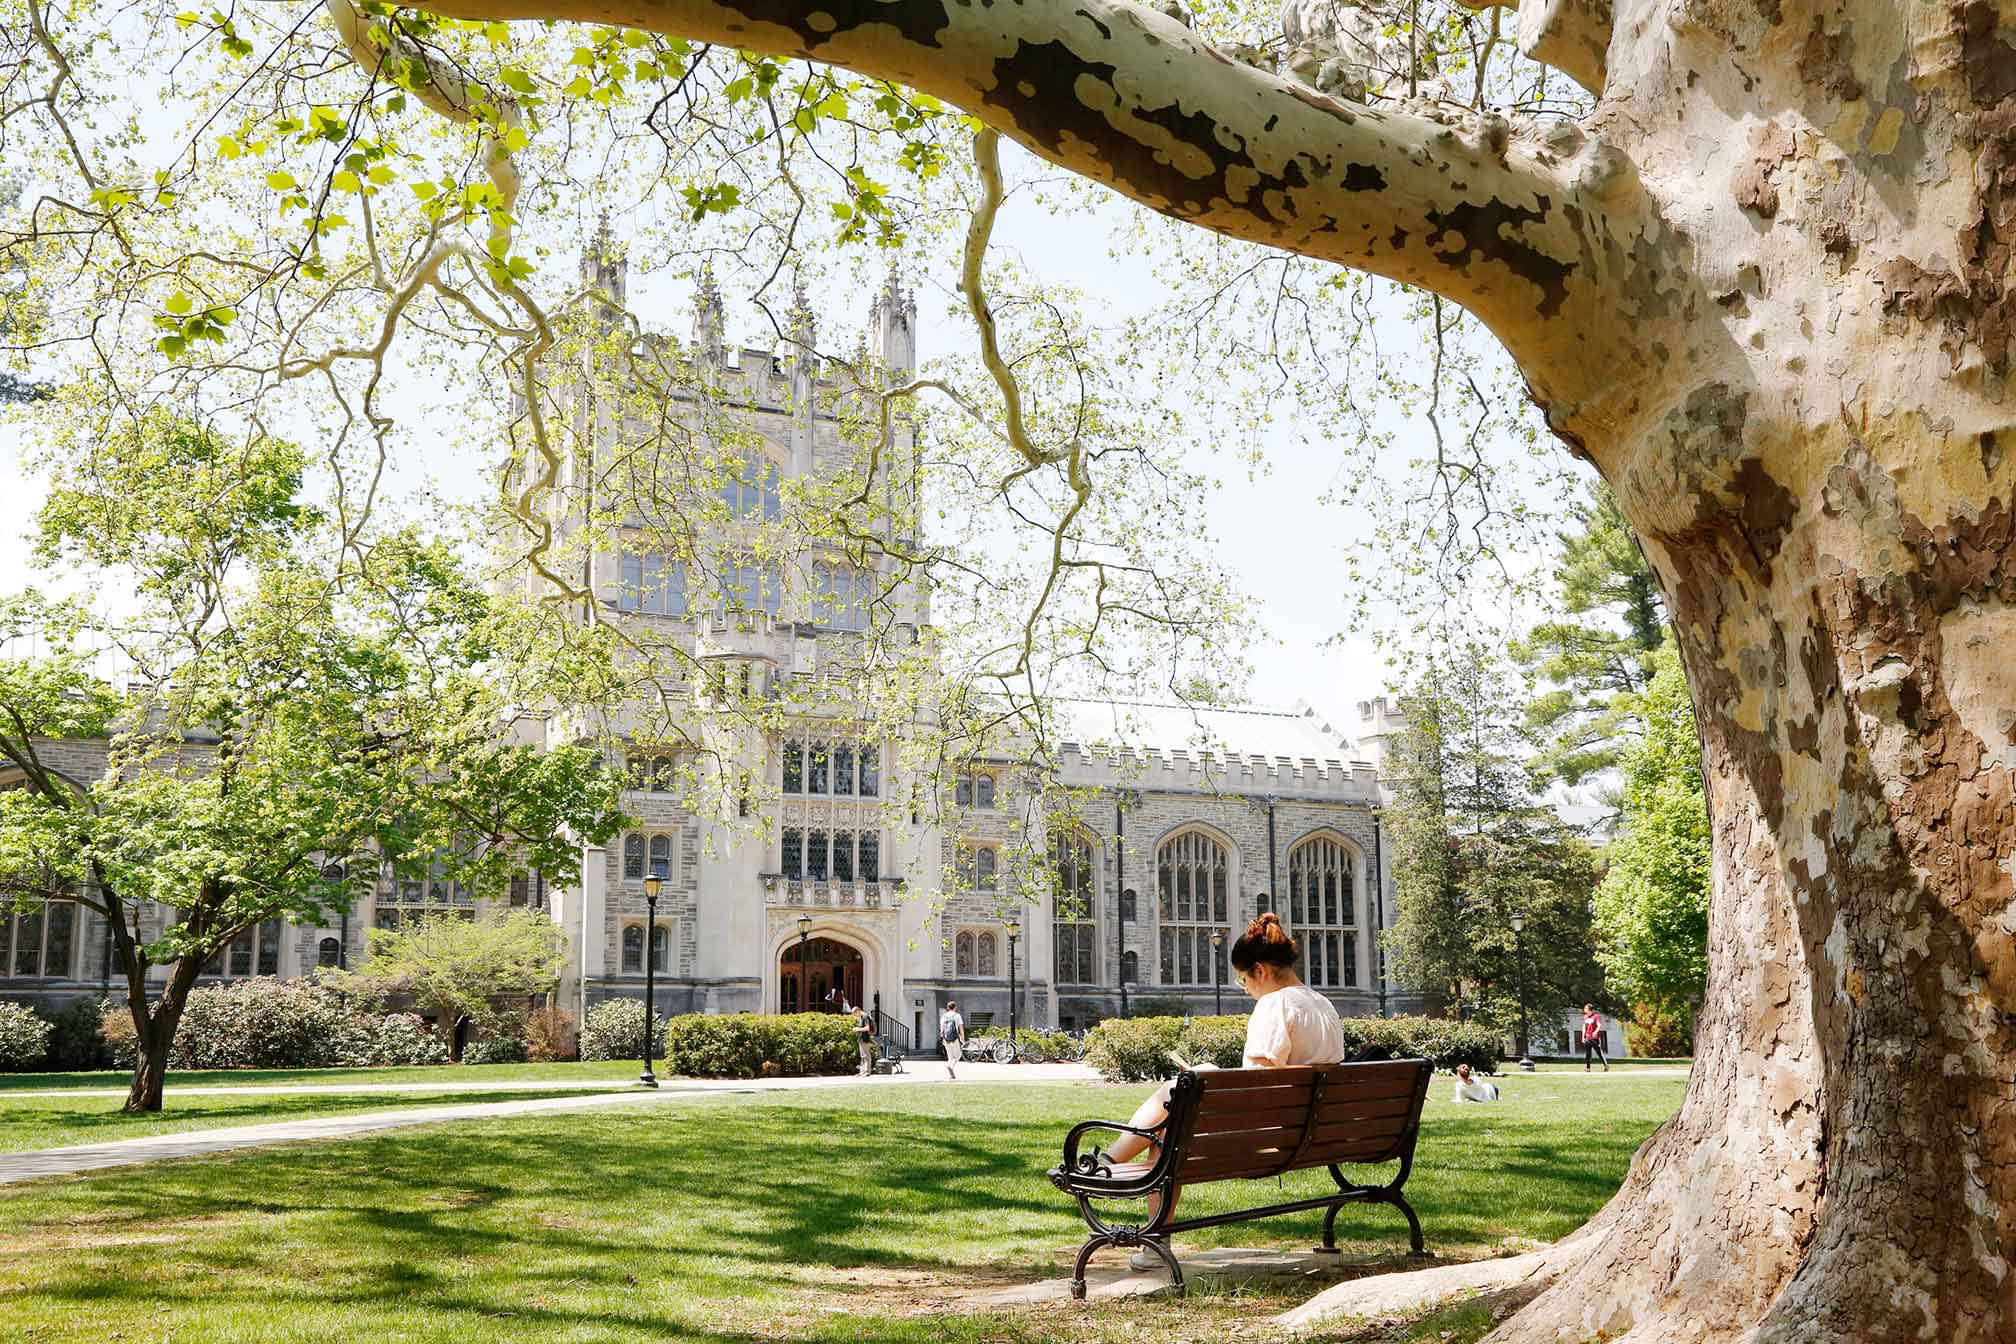 A person sits on a bench under a tree in front of the library